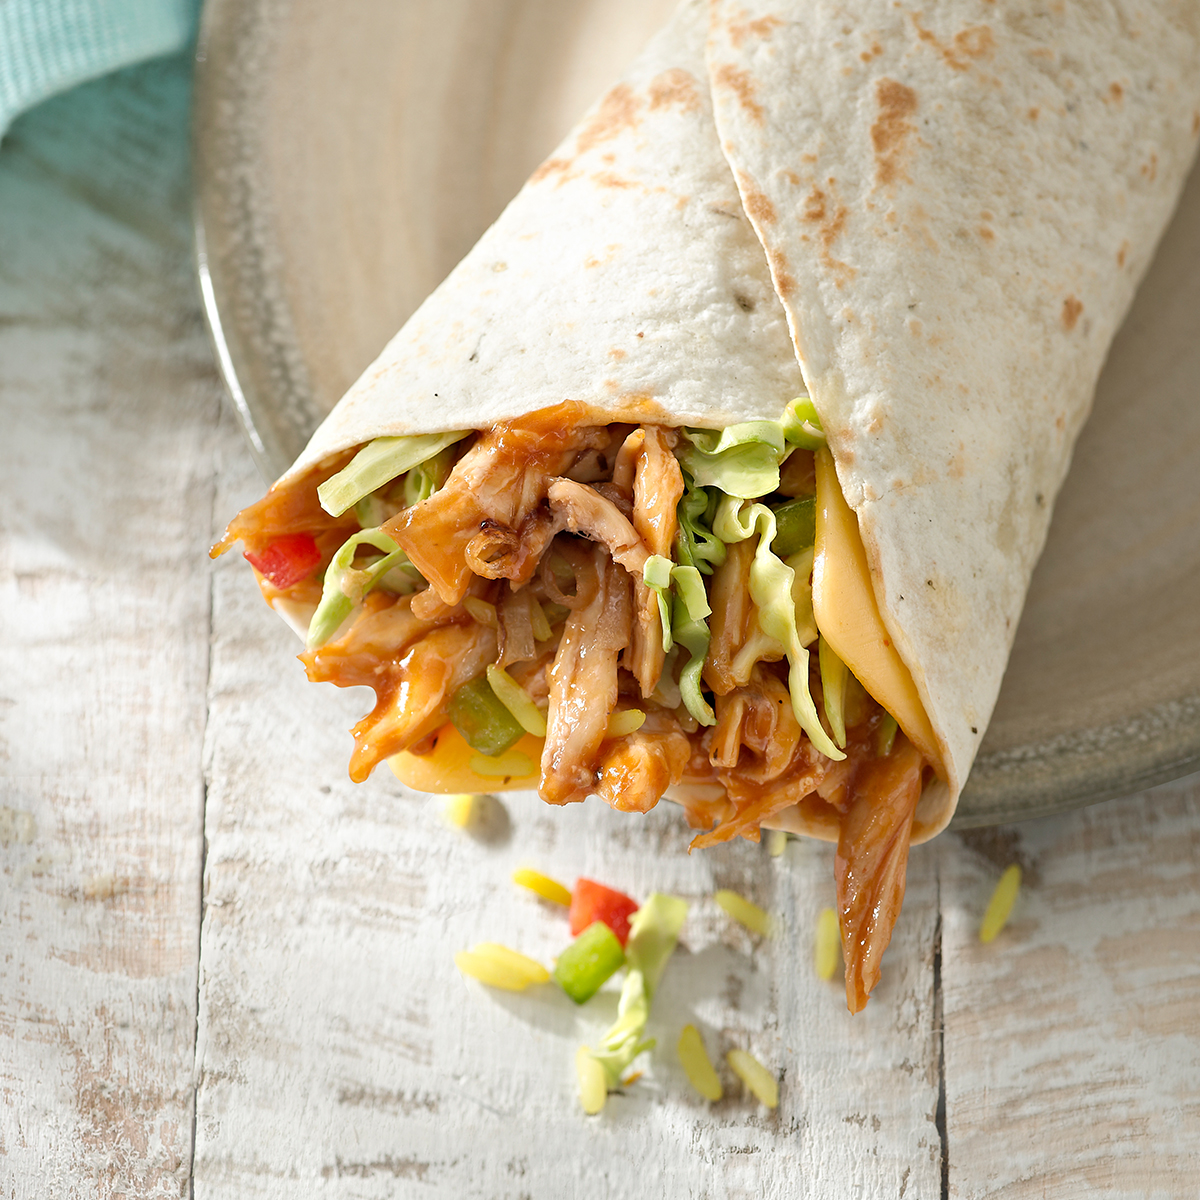 Pulled Chicken and Cheese Wrap (on its own)